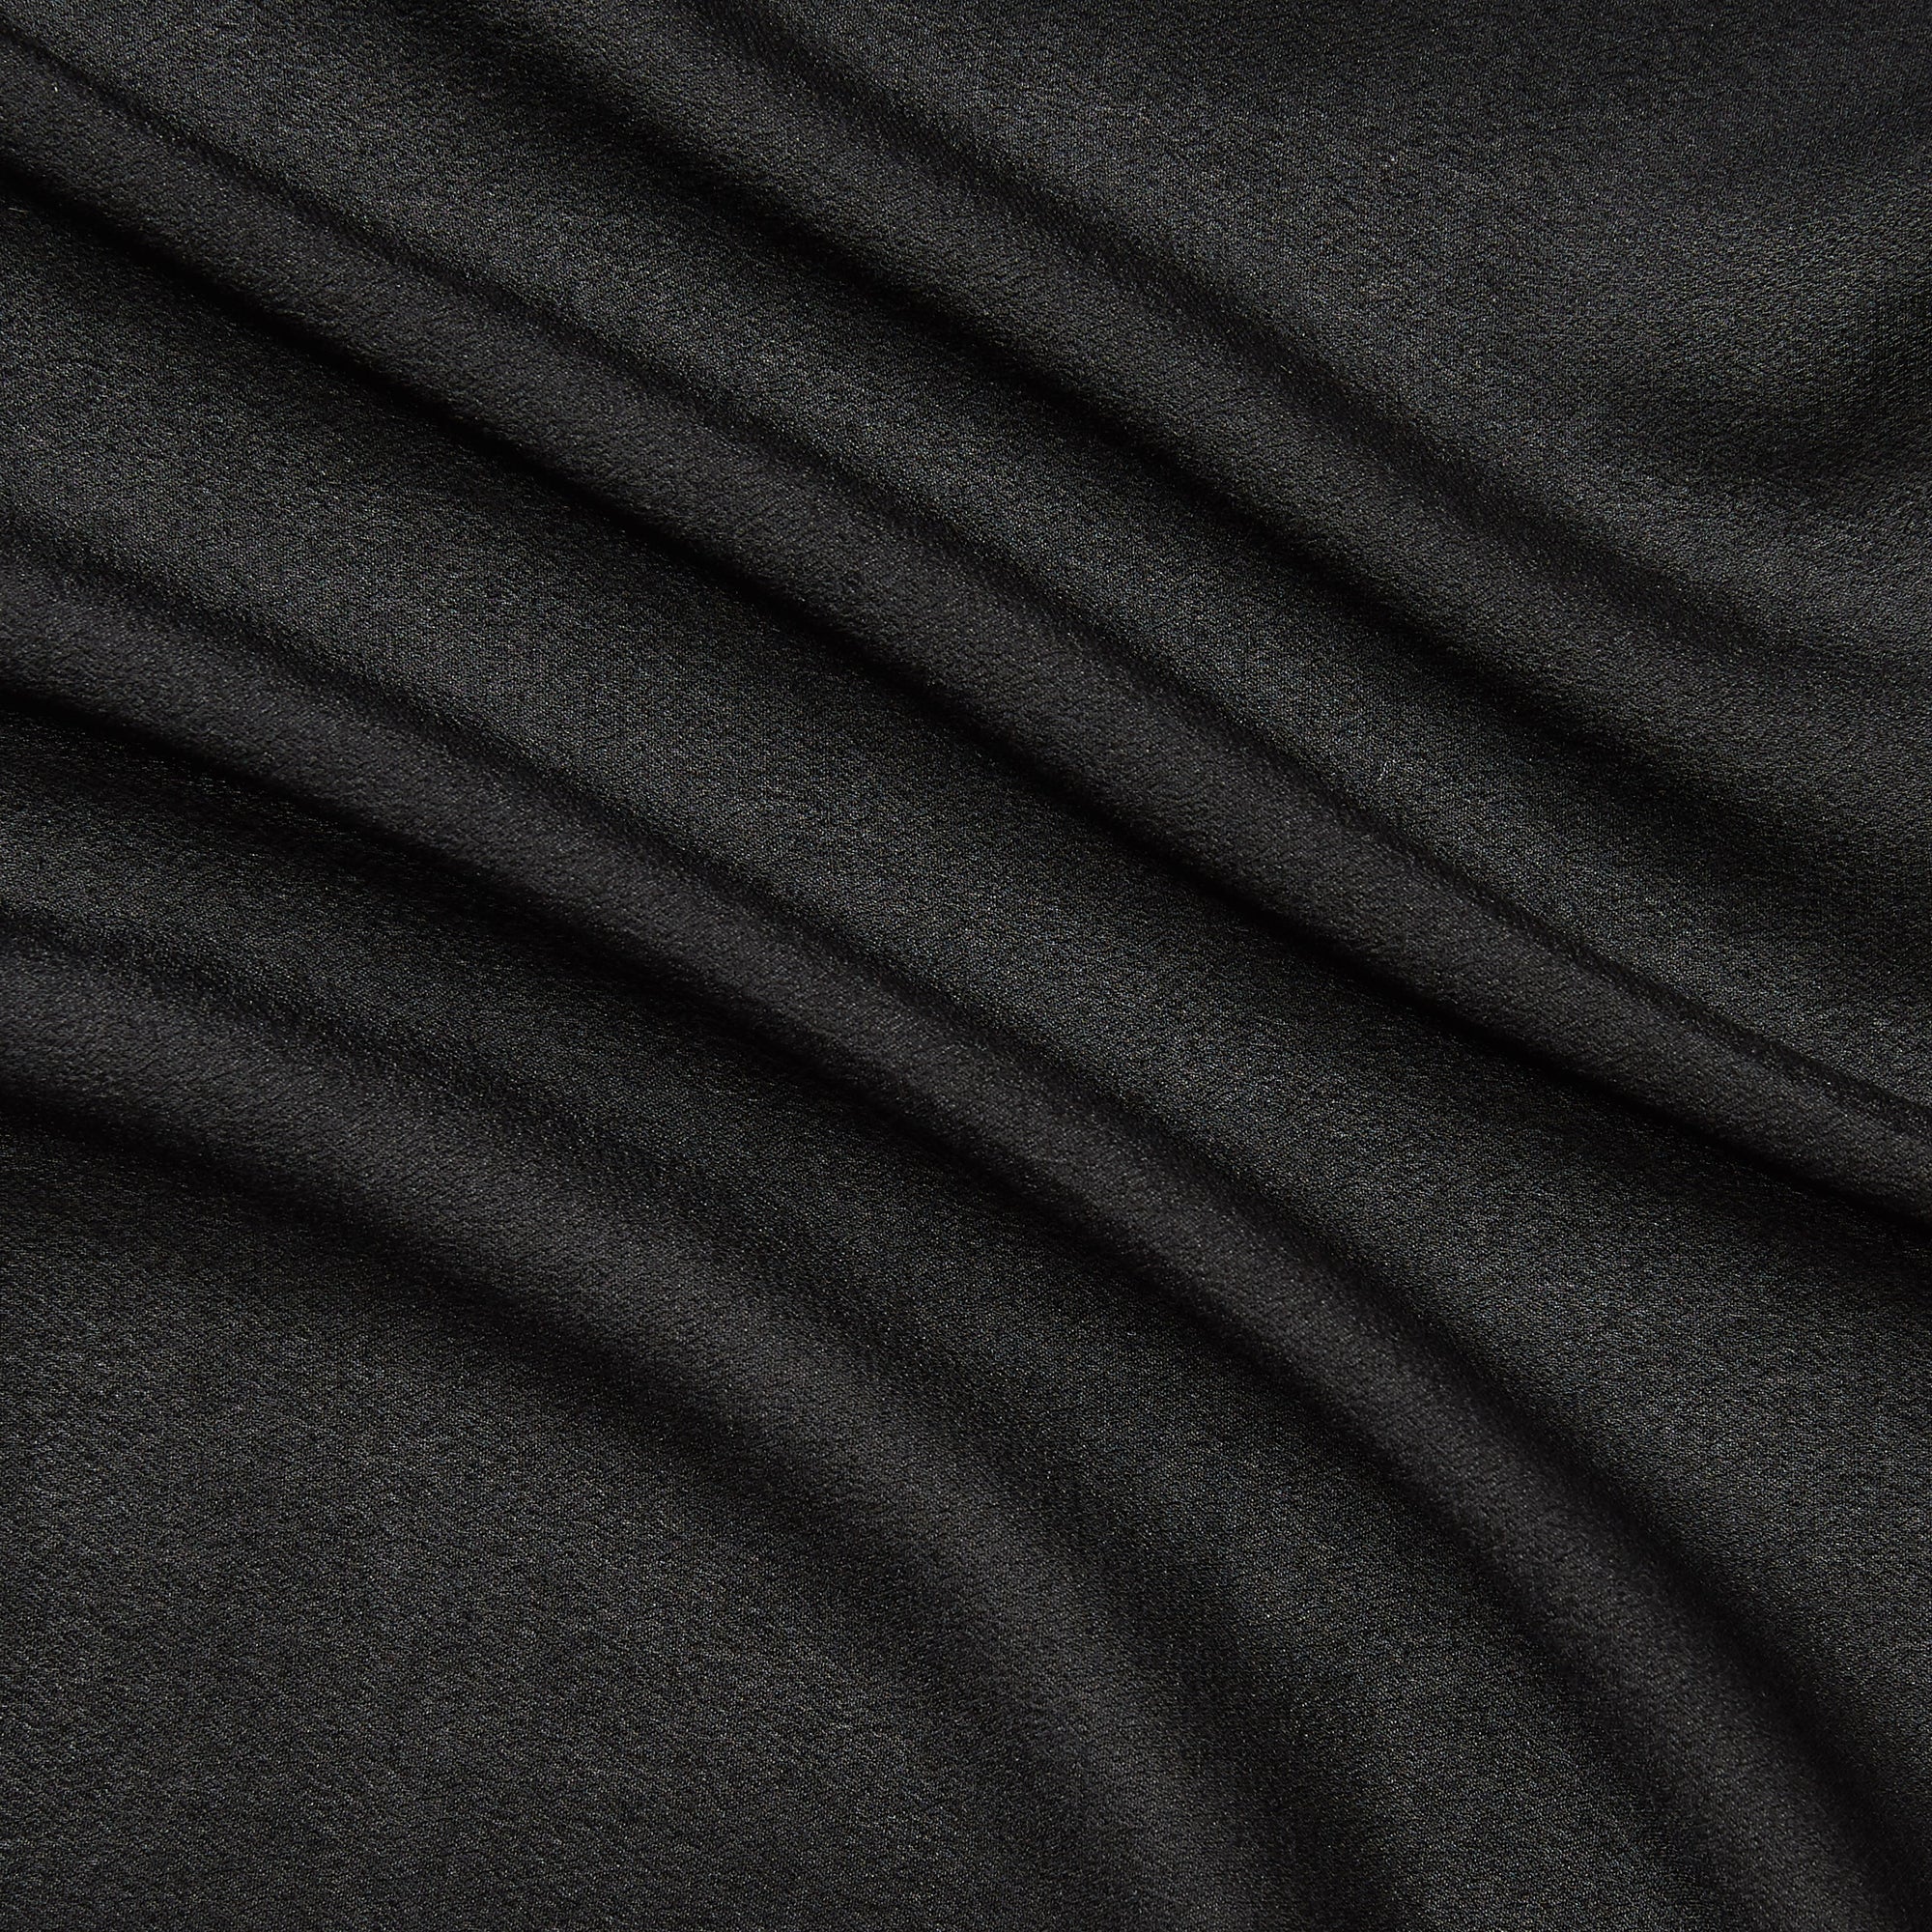 Illustrating shimmer a black colored fabric with metallic glitter print on Semi-sheer, soft pure silk georgette featuring good drape